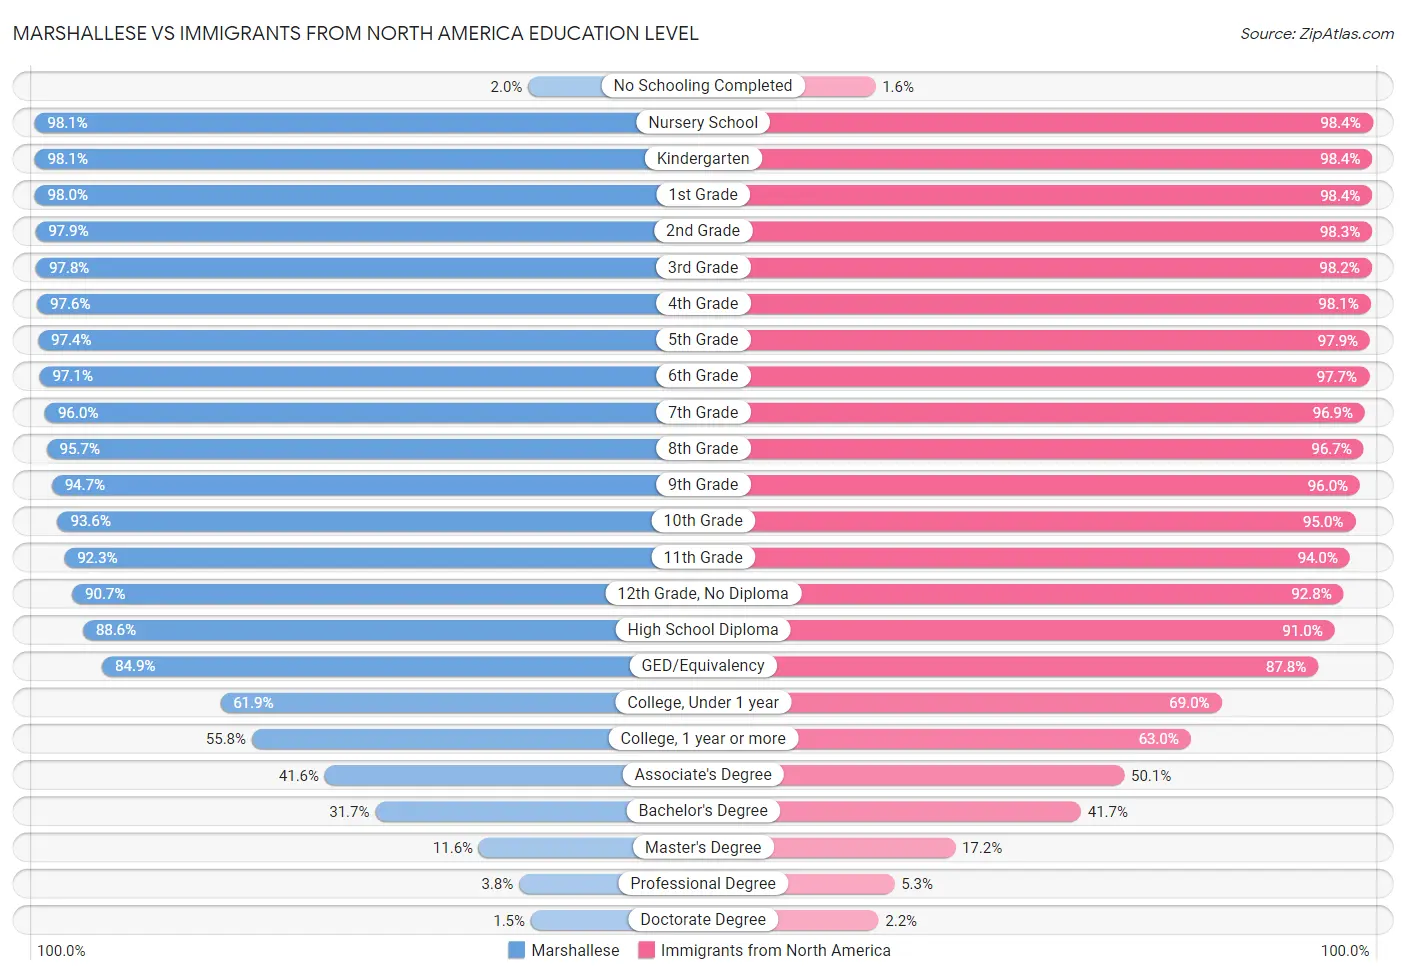 Marshallese vs Immigrants from North America Education Level